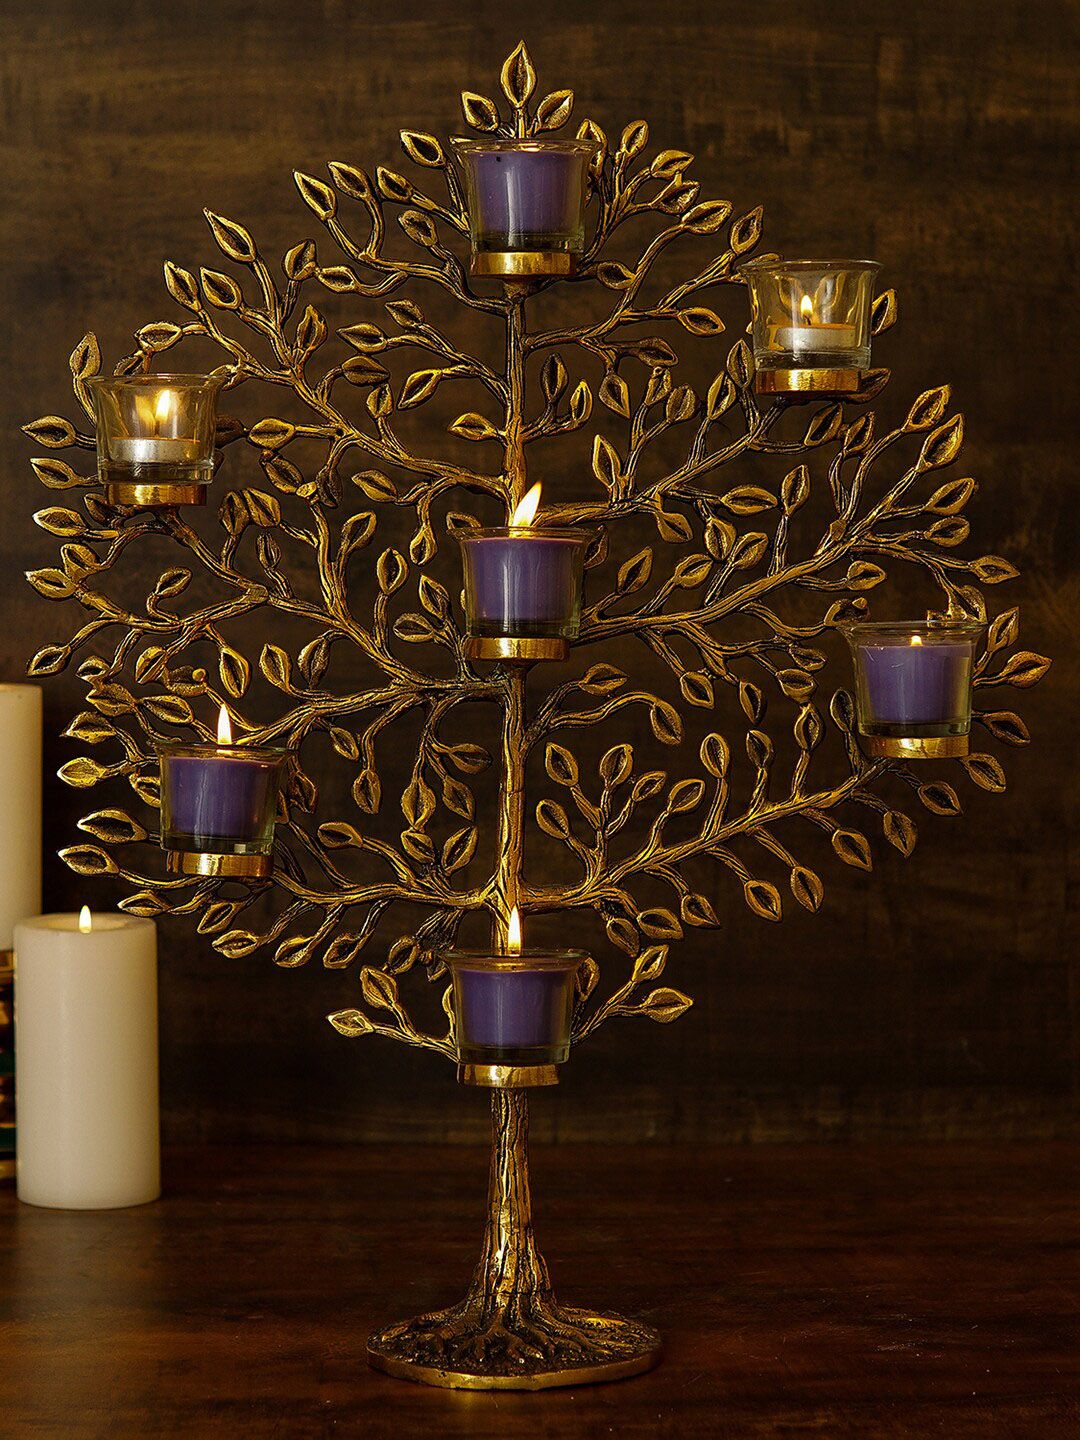 StatueStudio Bronze-Toned Tree With Tealight Candle Showpiece Price in India